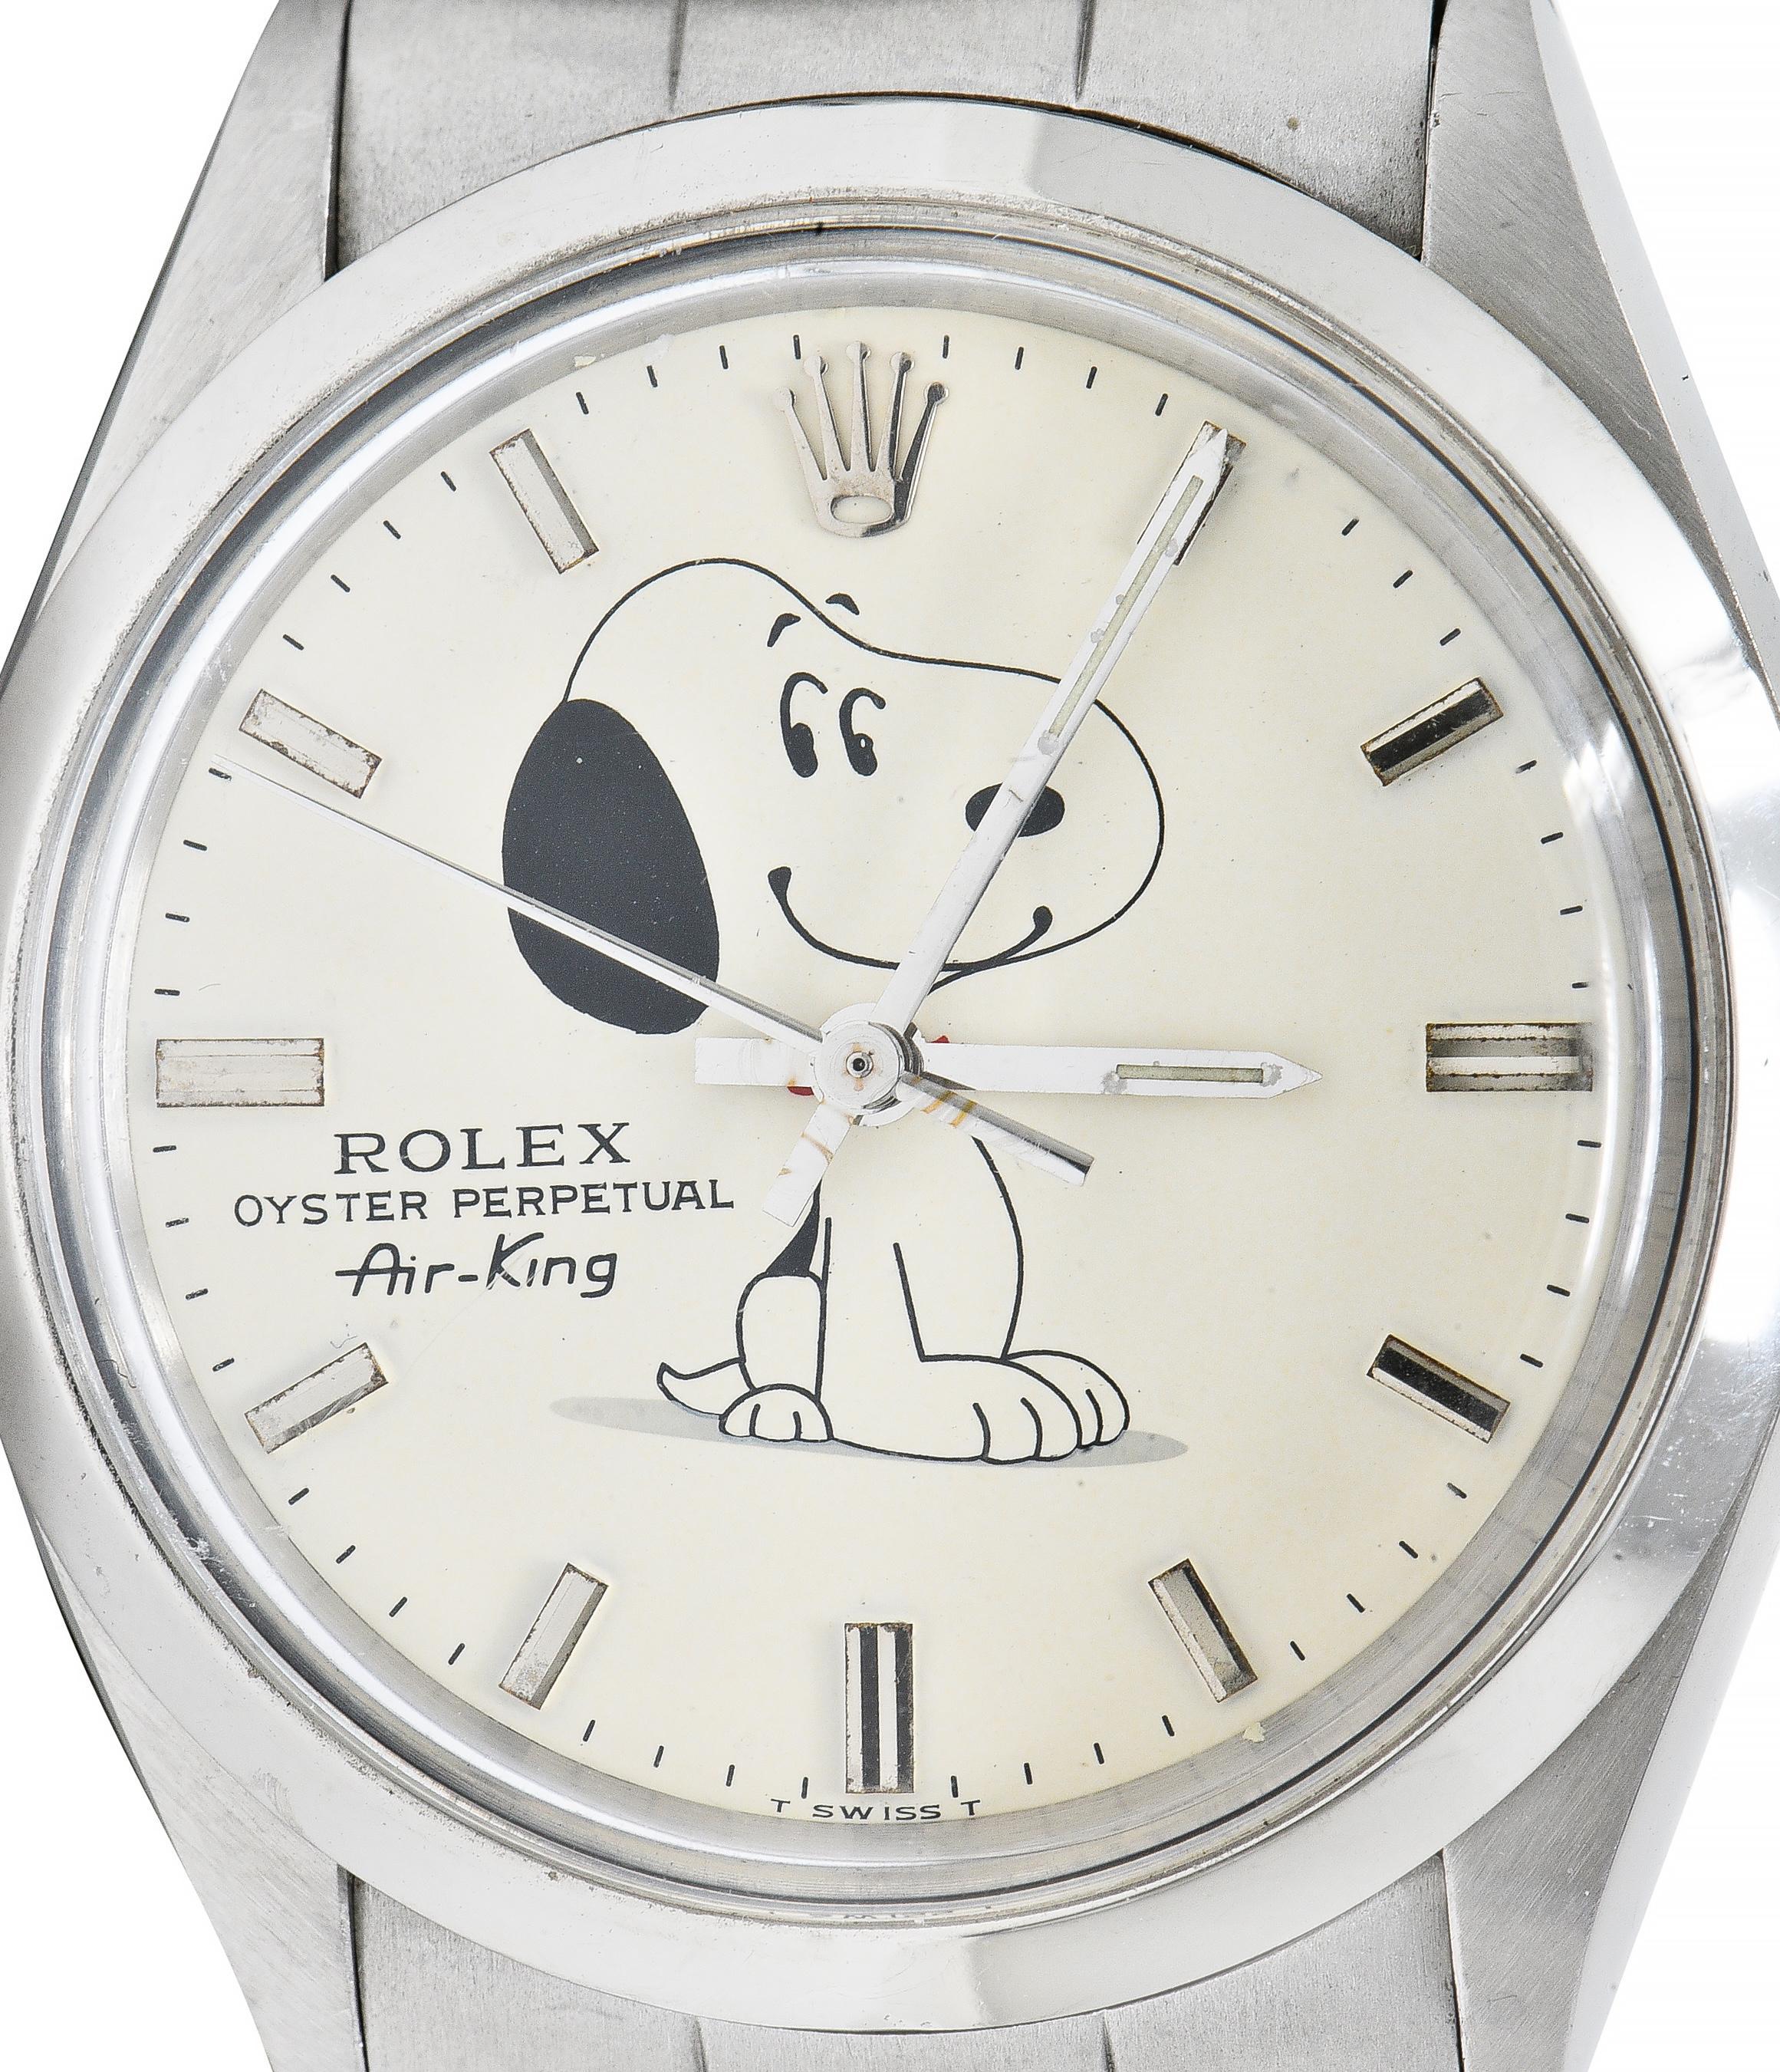 Centering a round cream-colored concentric dial watch face featuring steel stick numerals 
Centering a linear illustration of the Peanuts character Snoopy - sitting with a smile and raised eyebrows
With 'Rolex Oyster Perpetual Air King' and 'Swiss '